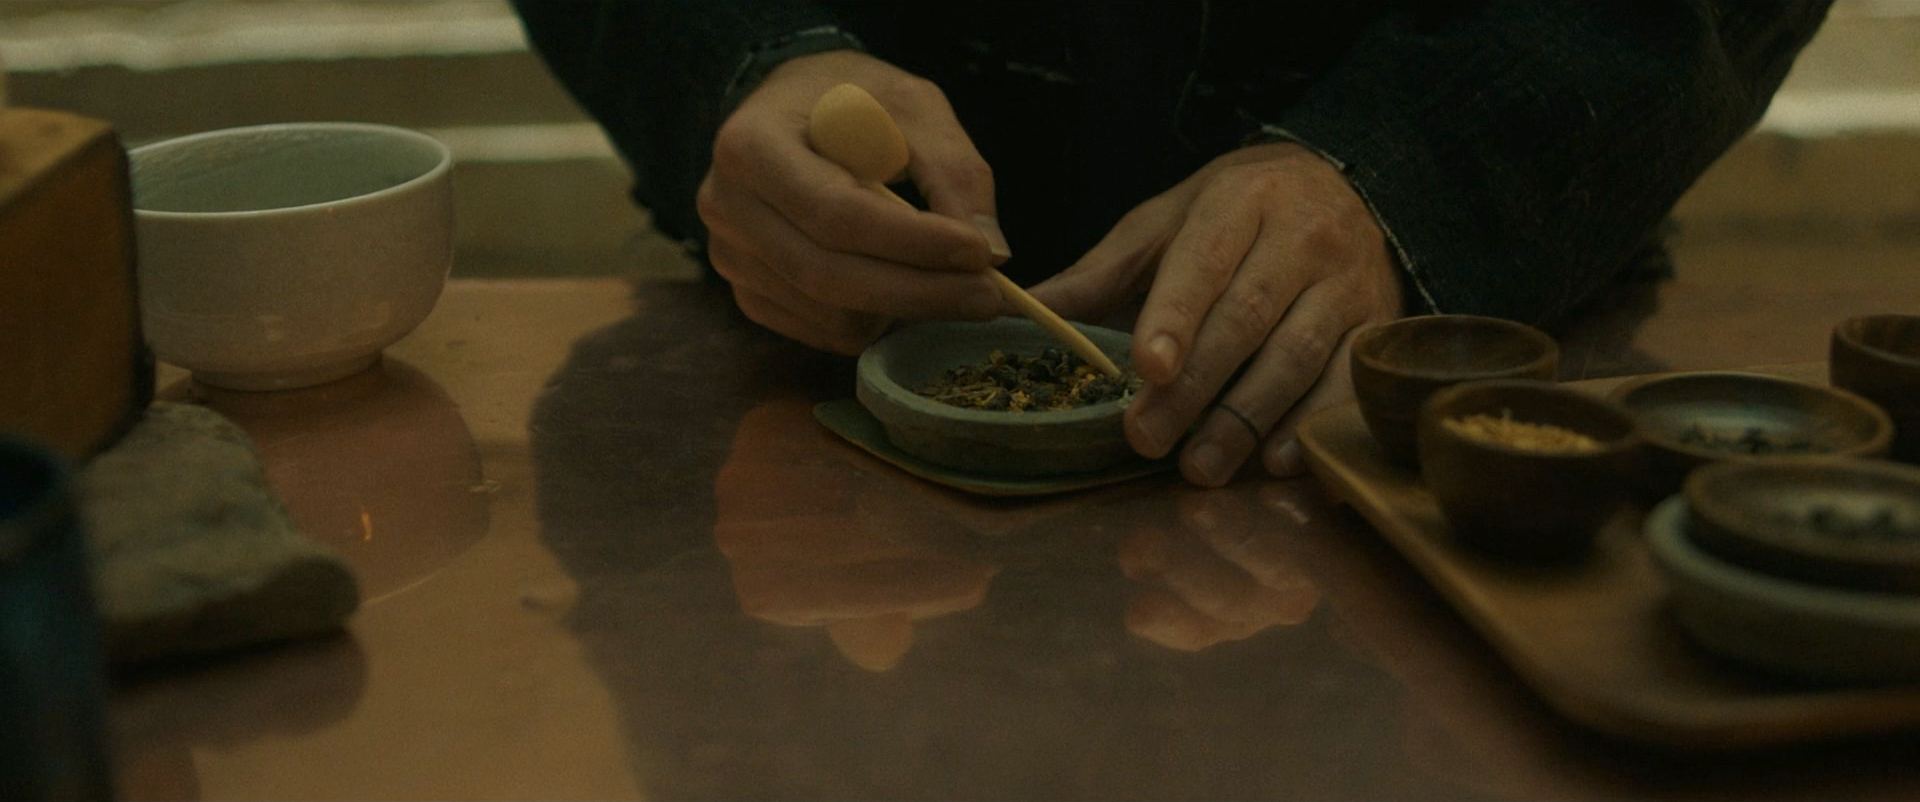 After Yang screenshot- Jake preparing tea, his ring finger is tattooed with a ring above the high knuckle.